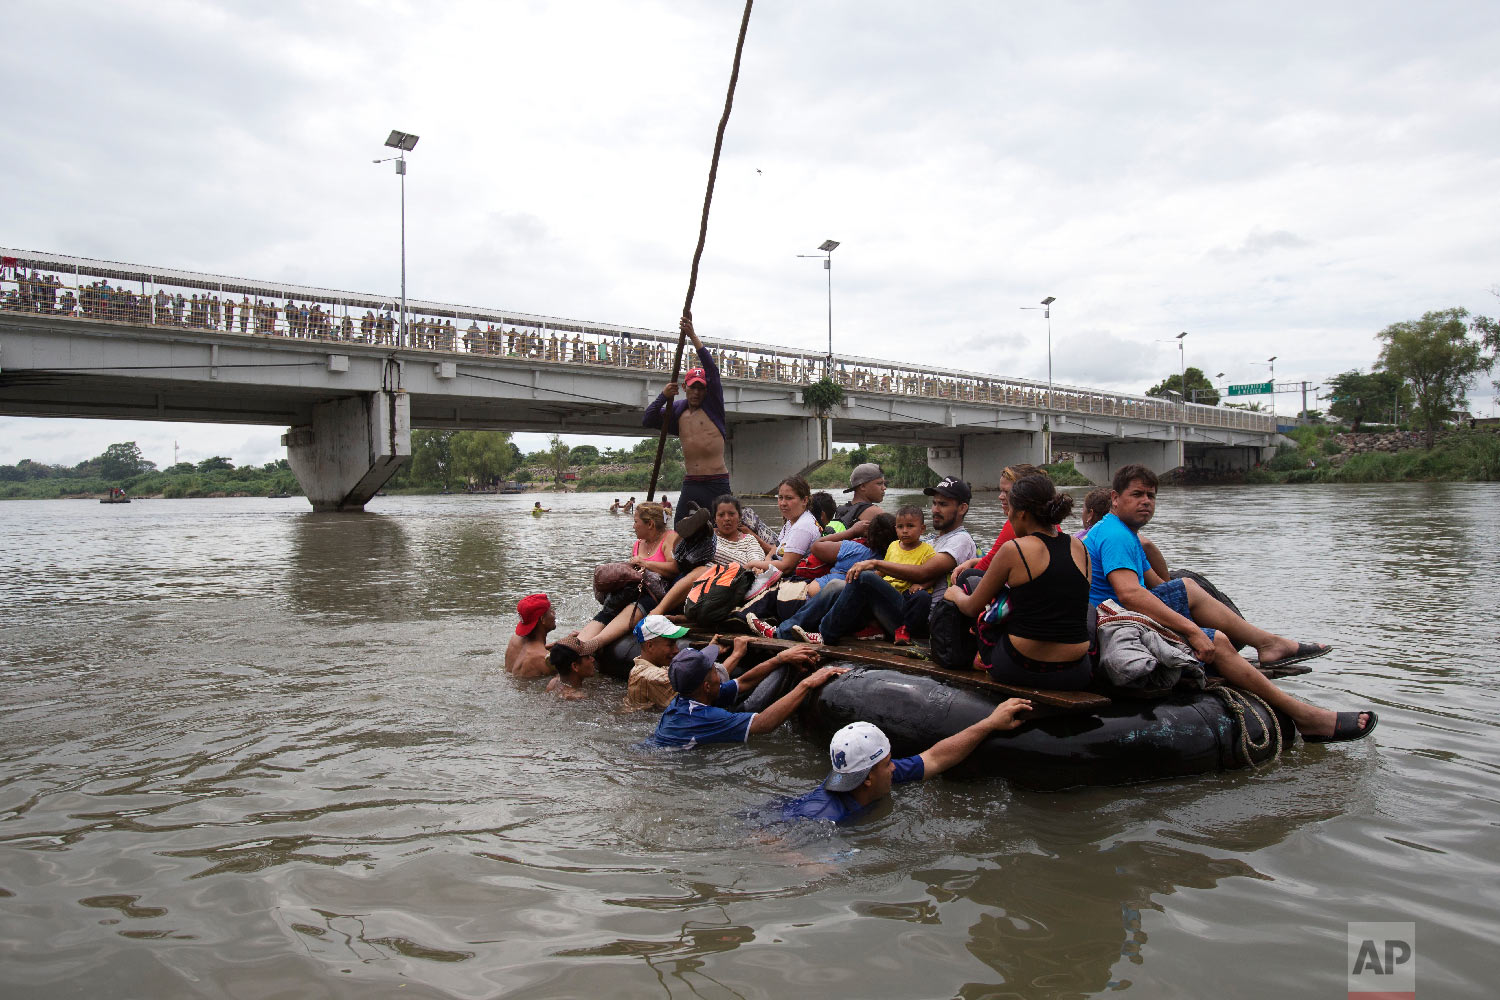  A group of Central American migrants cross the Suchiate River aboard a raft made out of tractor inner tubes and wooden planks, on the the border between Guatemala and Mexico, in Ciudad Hidalgo, Mexico, Oct. 20, 2018. (AP Photo/Moises Castillo) 